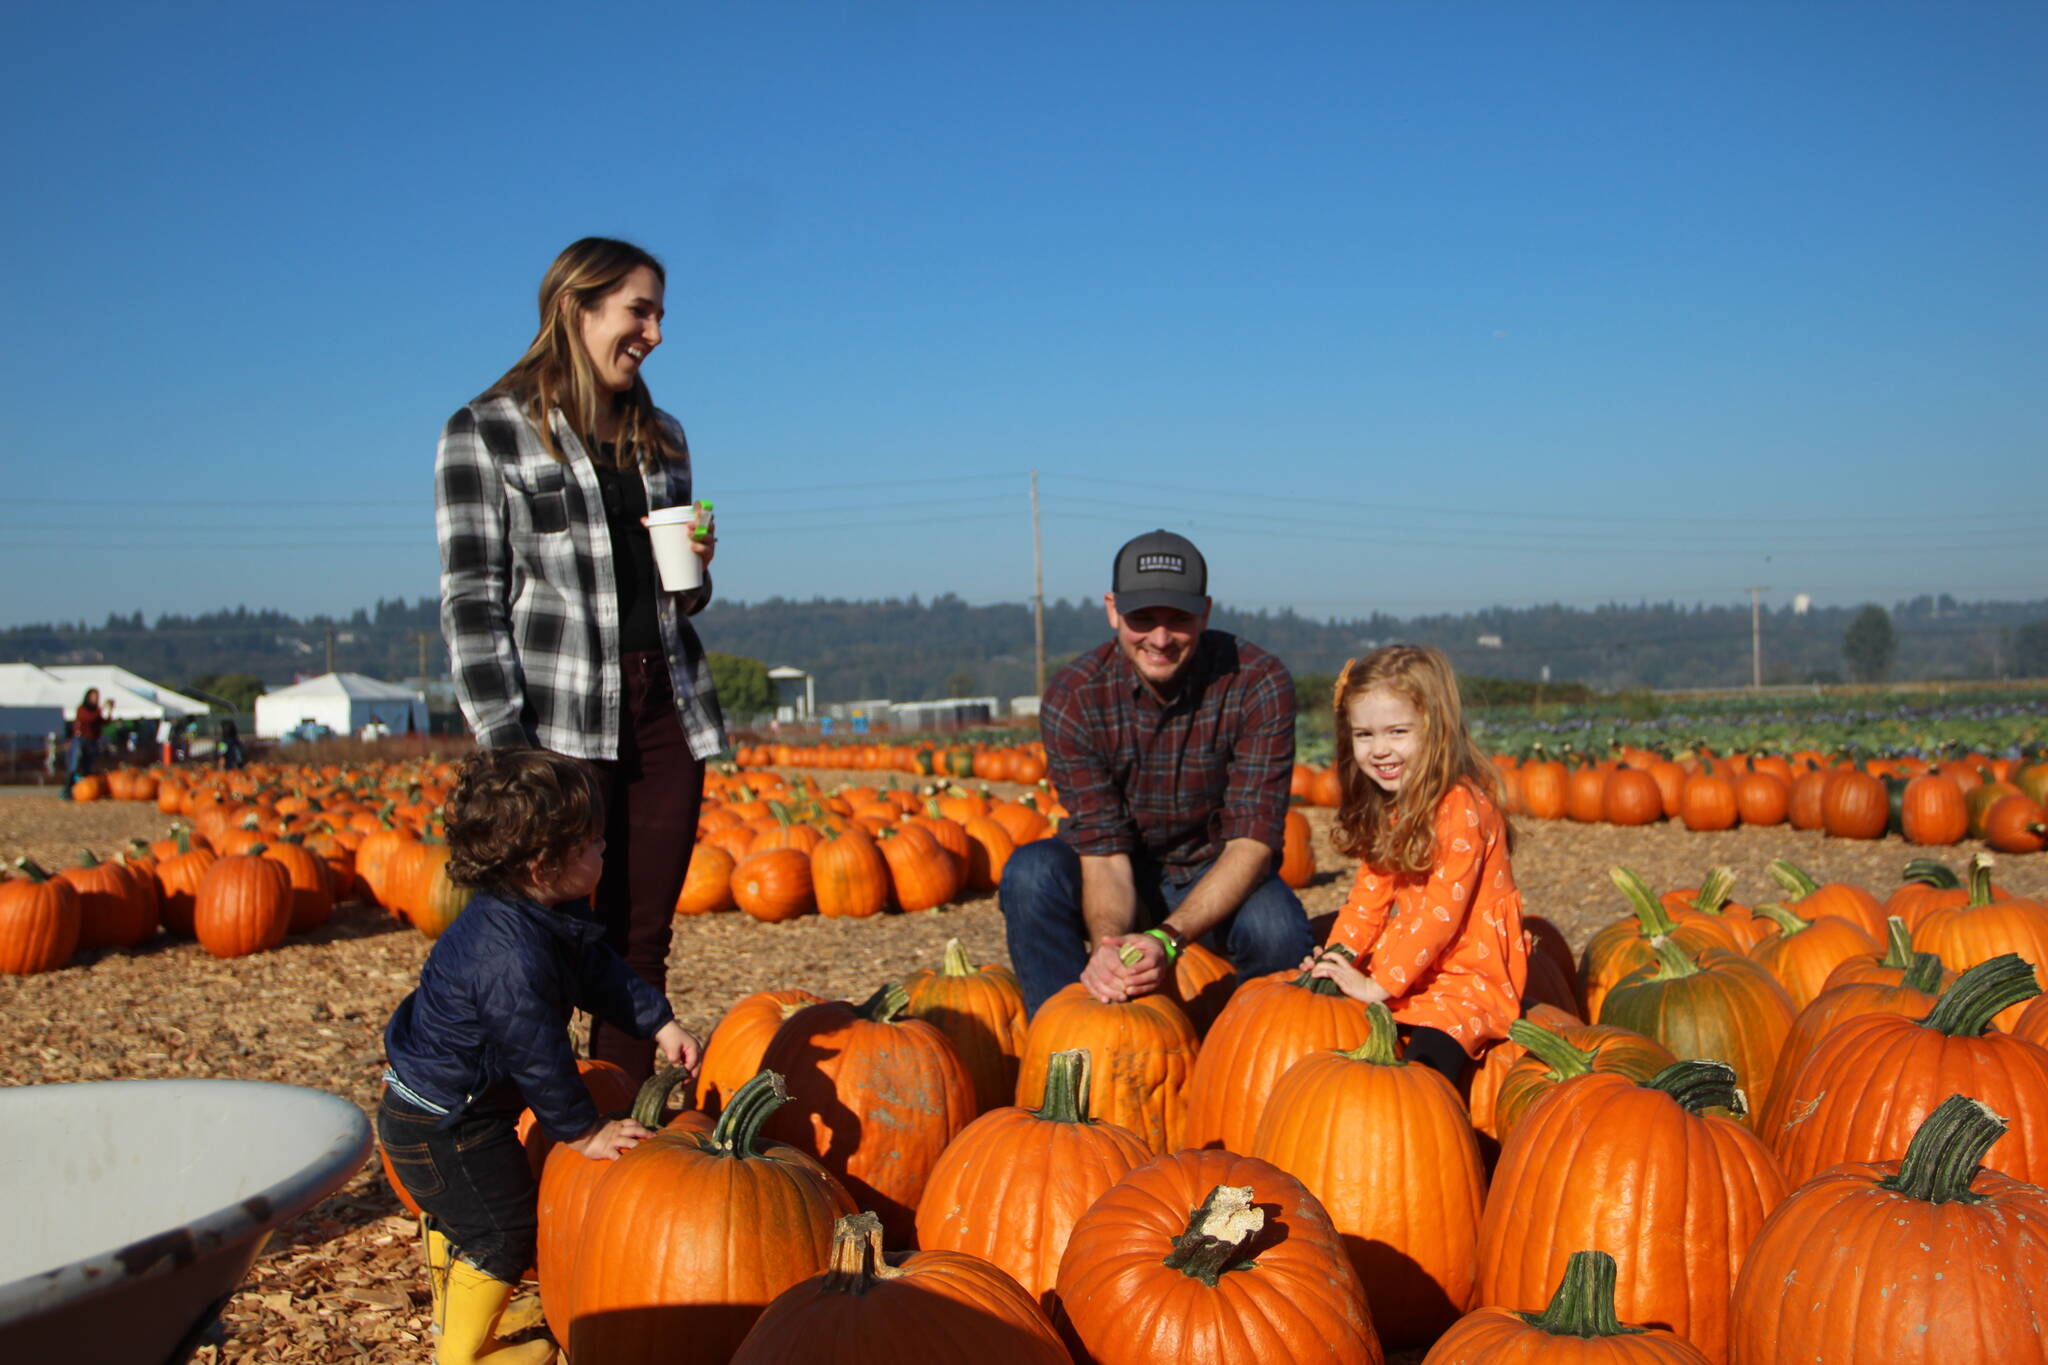 Kristine and Ken Forester search for pumpkins with their kids Elise, 3, and Cameron, 18 months.